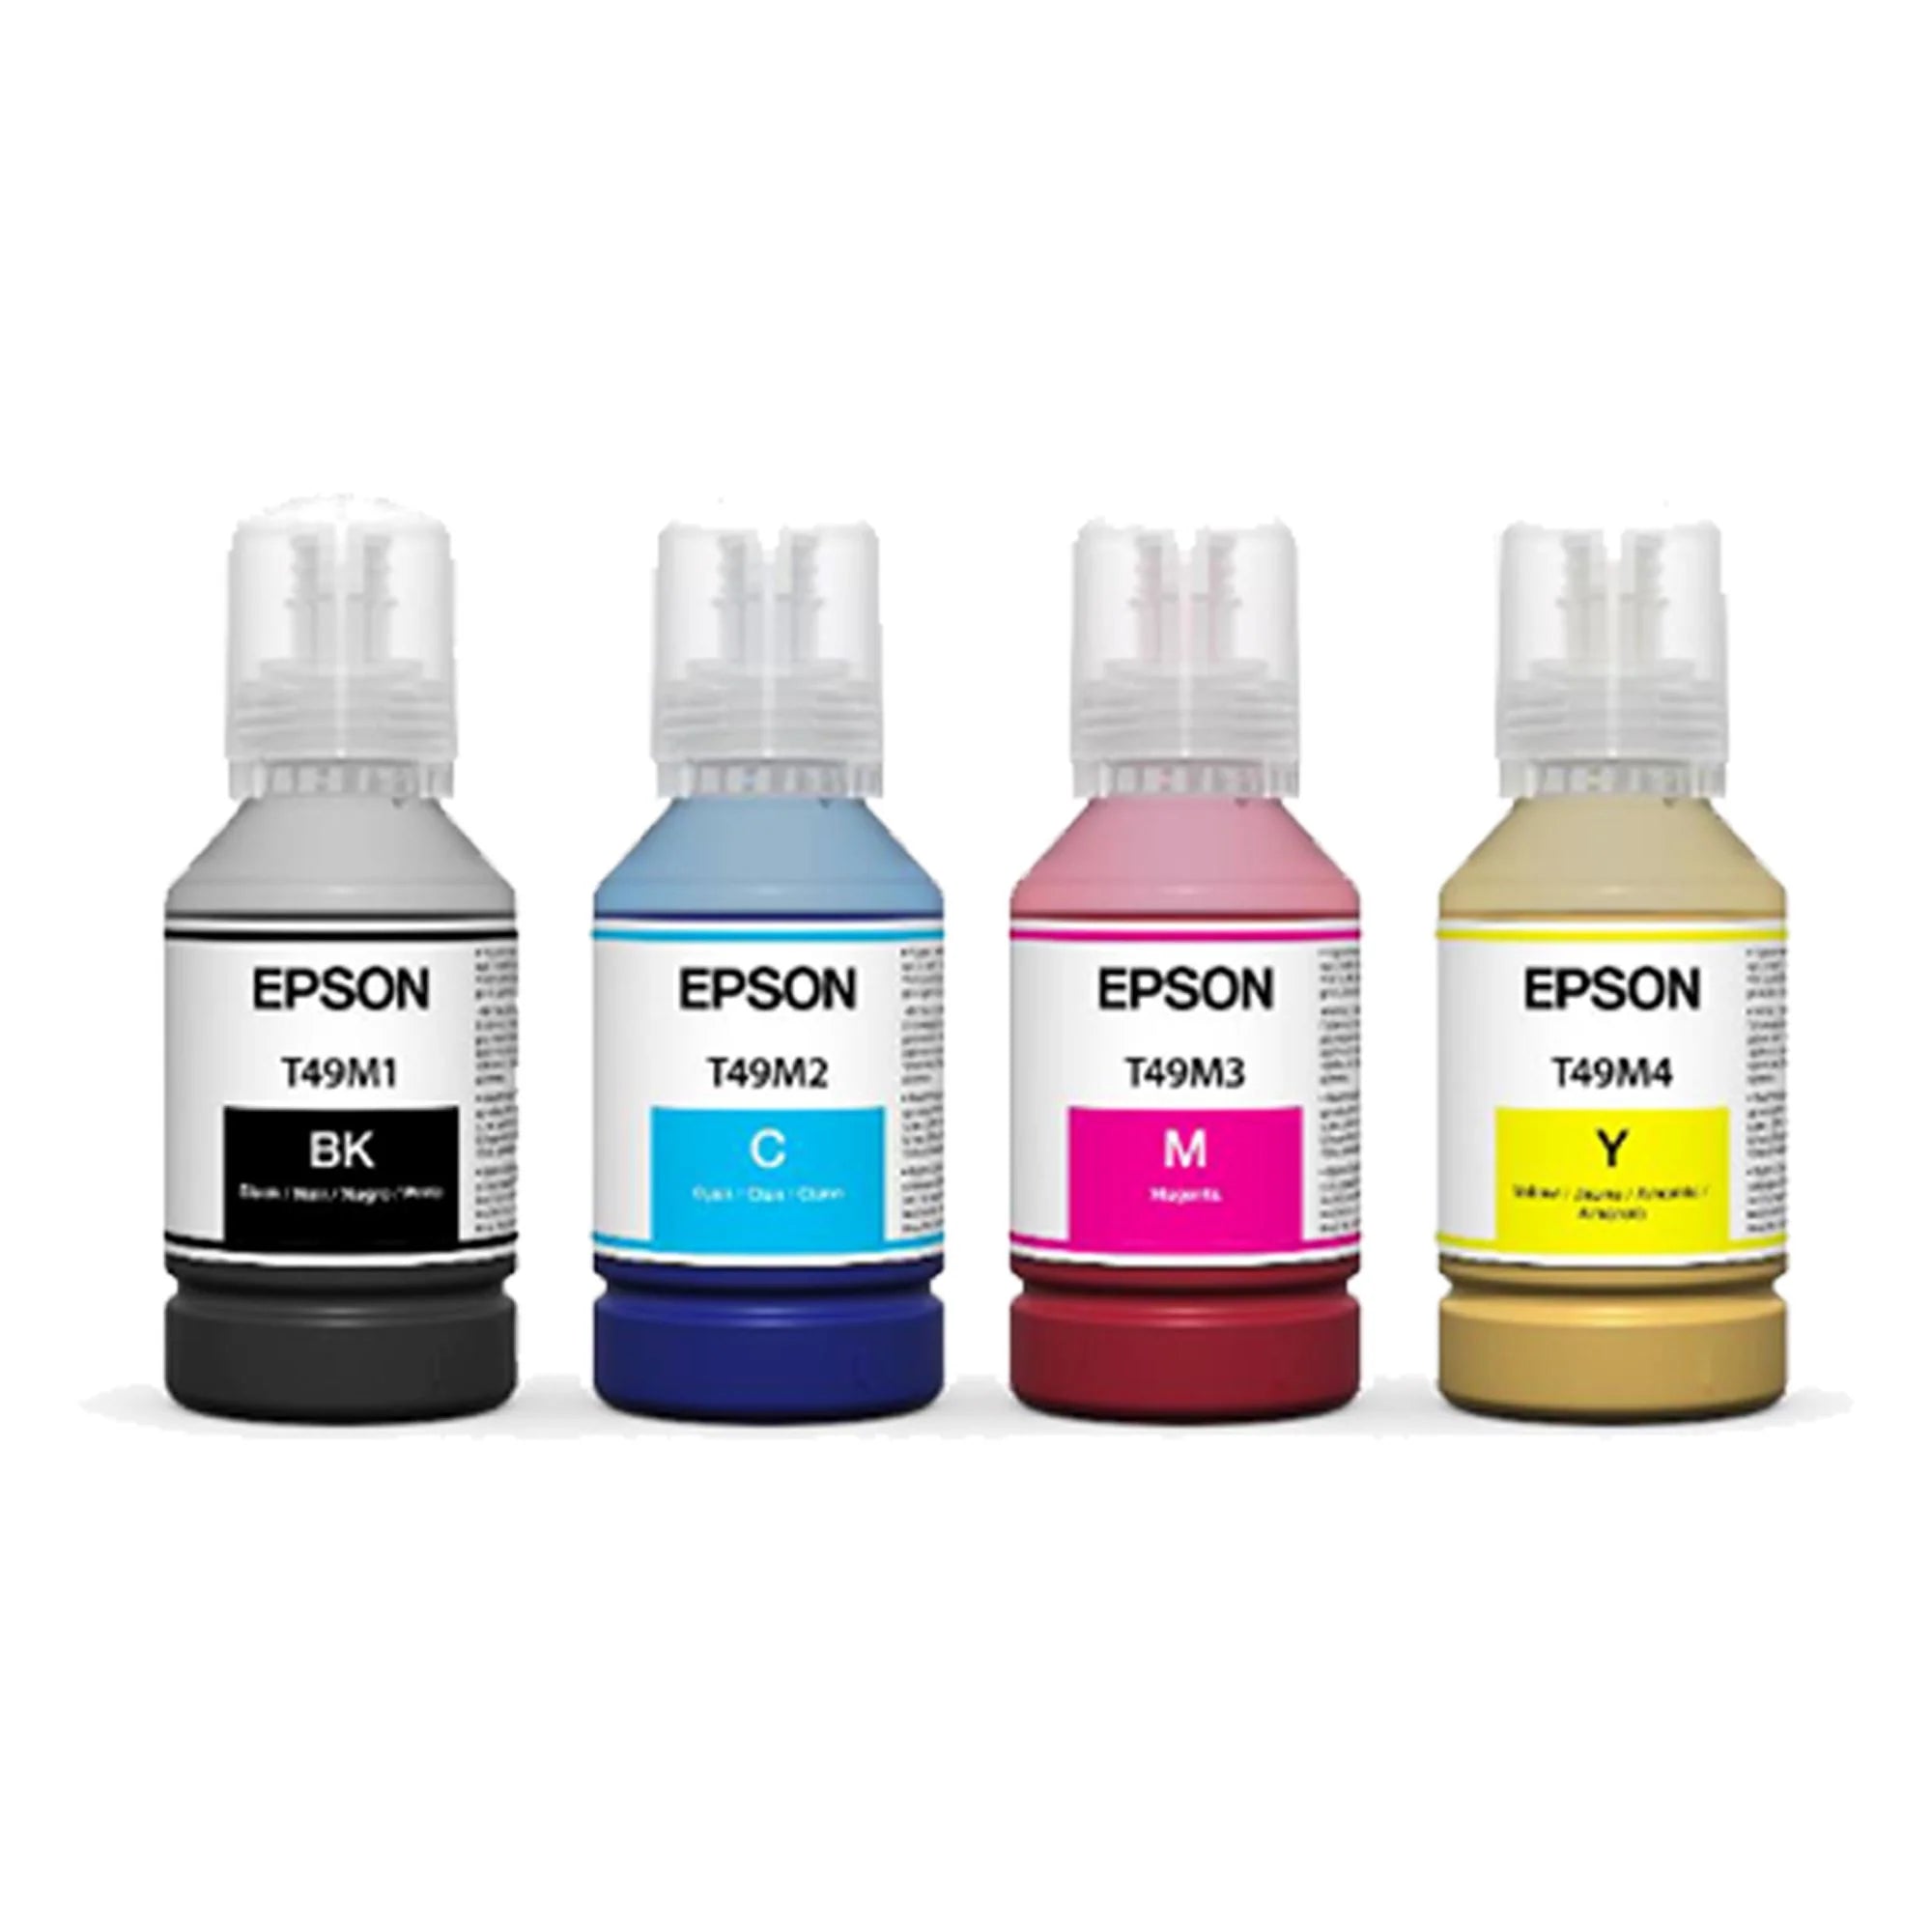 EPSON SureColor F170 and F570 Ink Bottles - 140 ml - 0